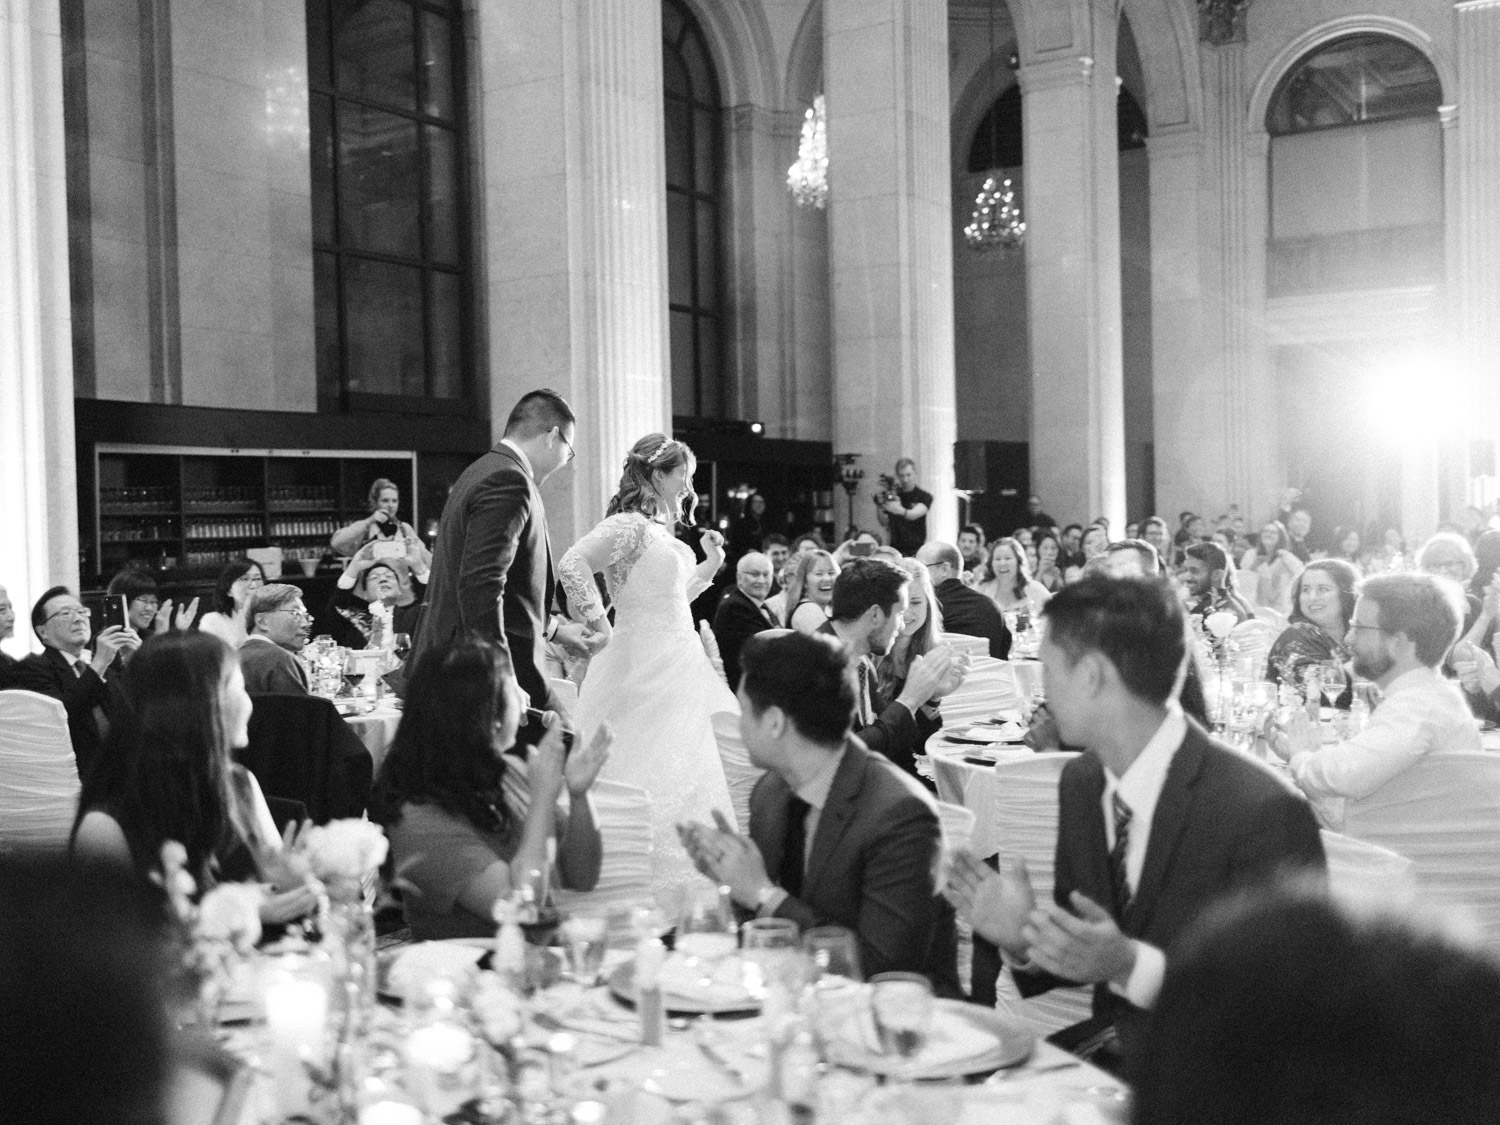 Timeless winter wedding photographs at one king west hotel, by toronto photographer corynn fowler photography